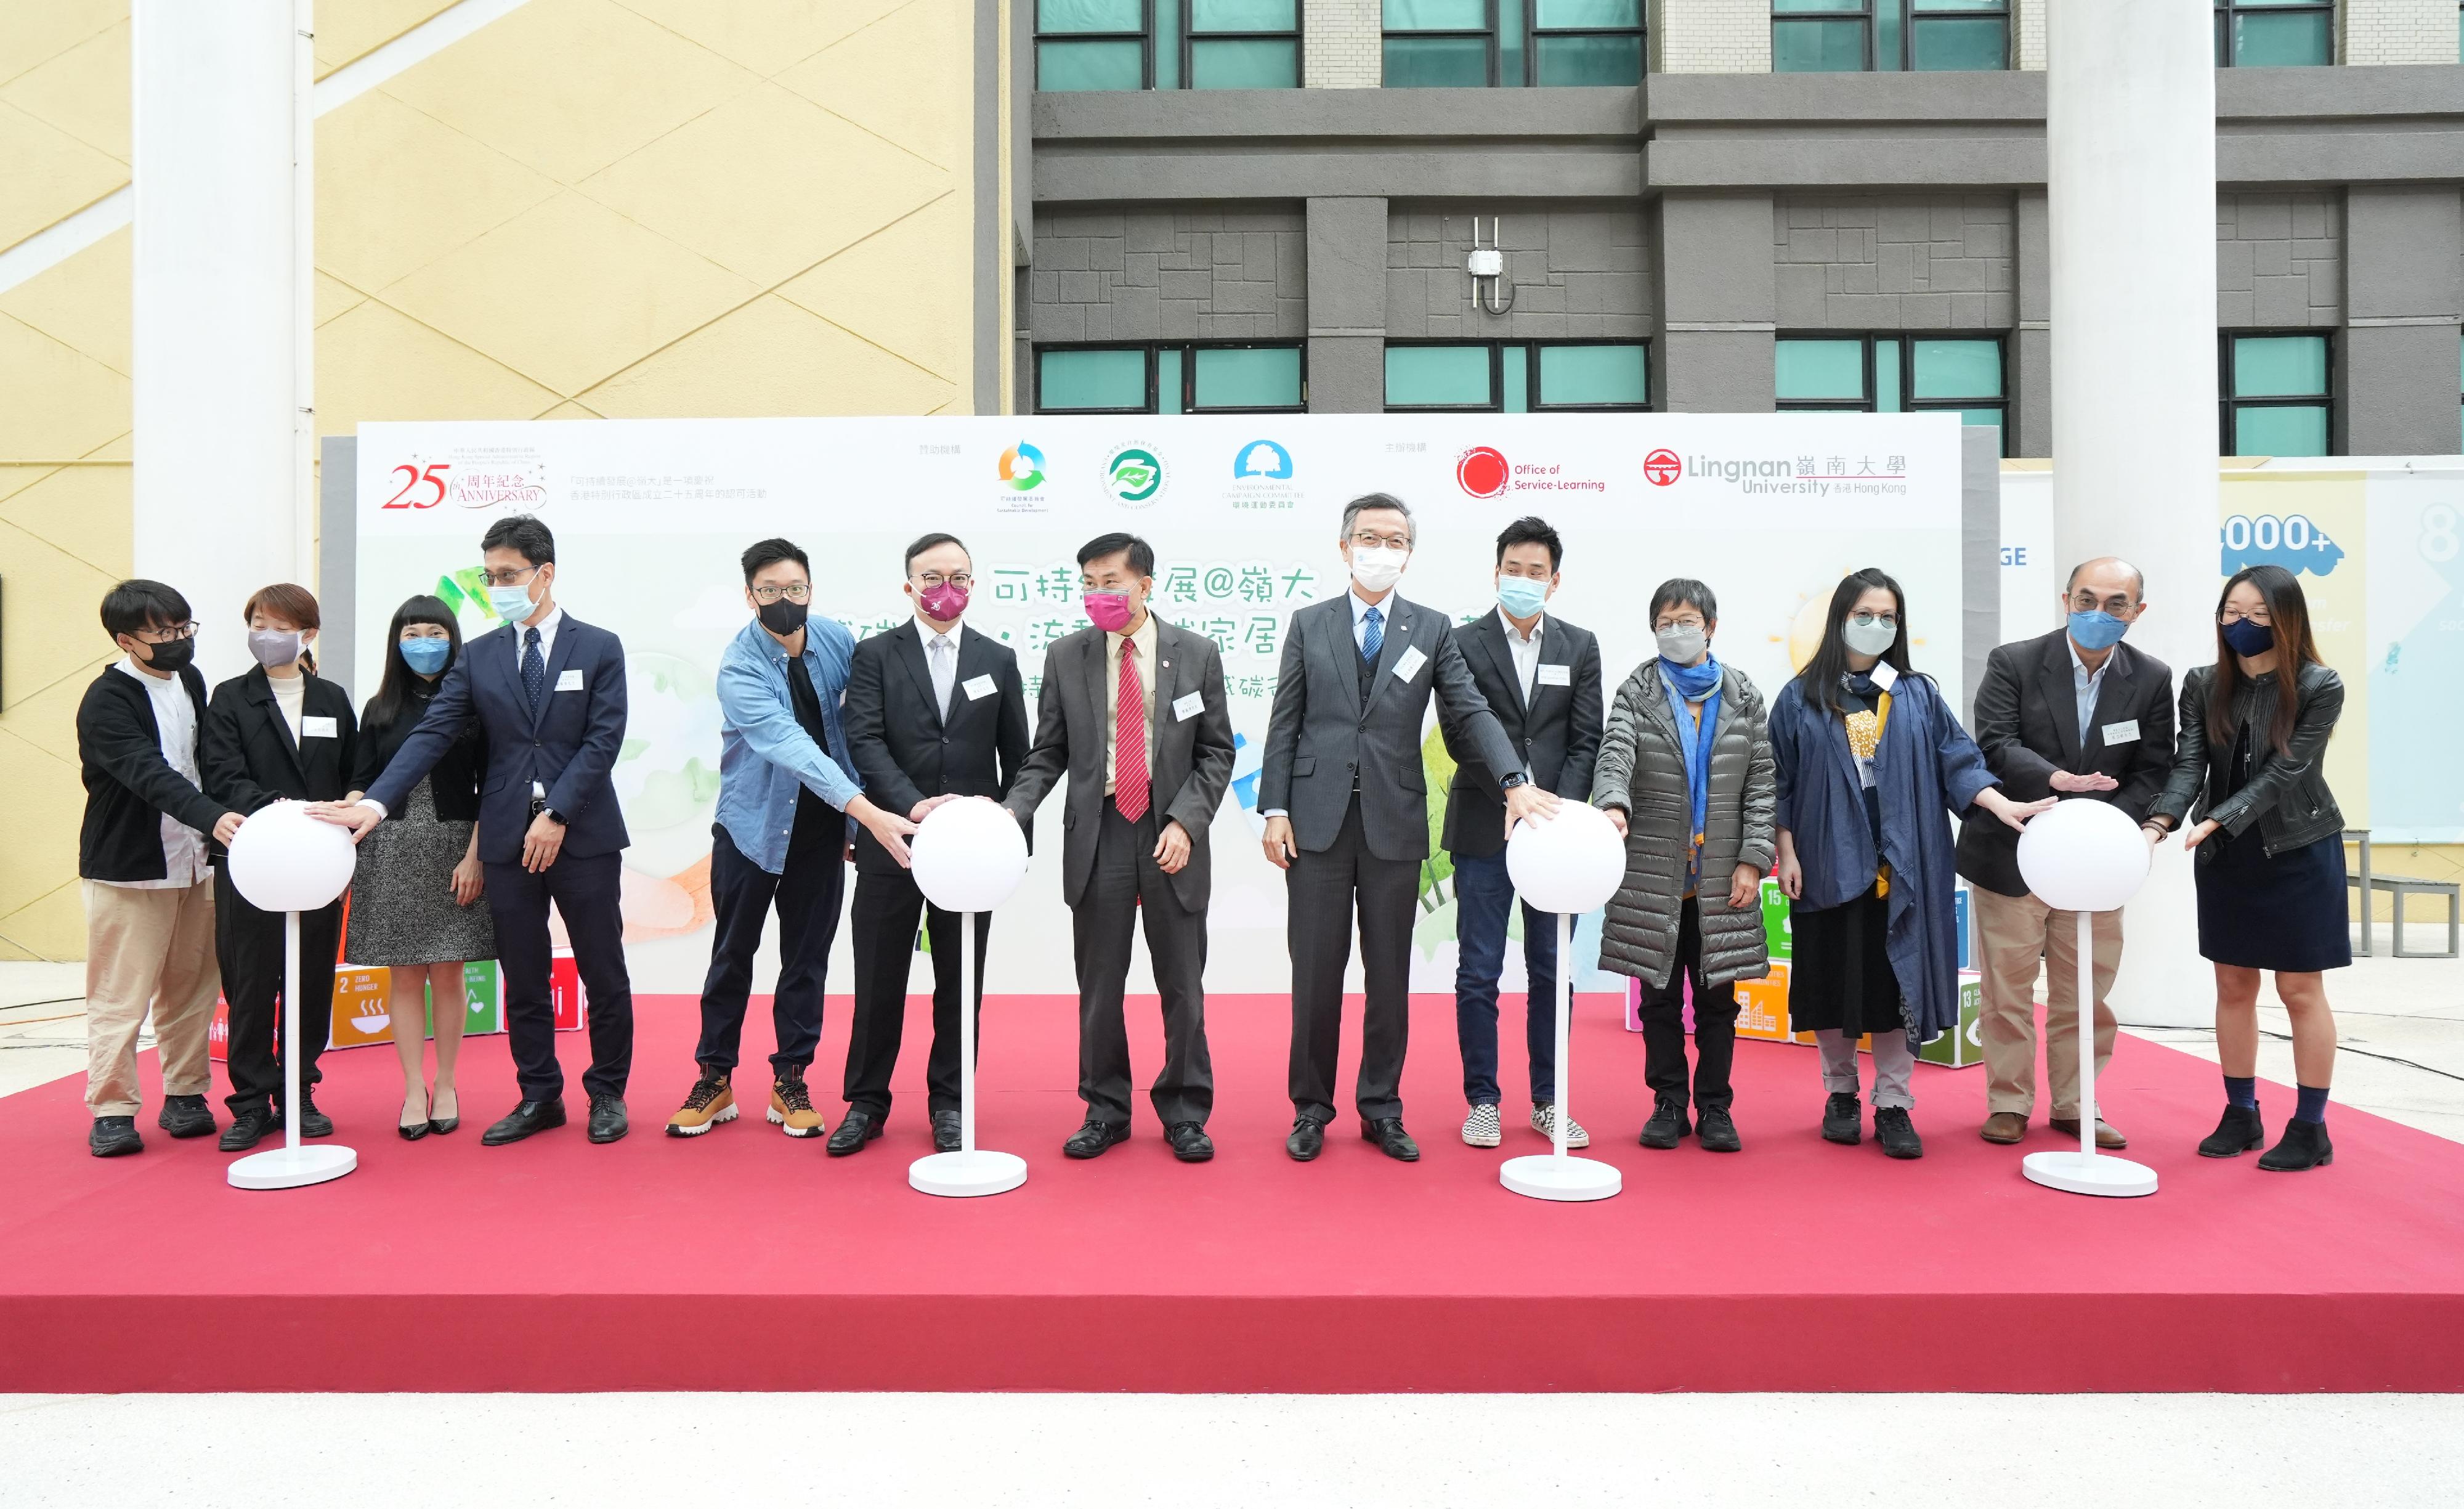 The opening ceremony of the Carbon Neutral Action project, funded by the Council for Sustainable Development (SDC), was held today (December 1). Photo shows the Chairman of the SDC, Dr Lam Ching-choi (sixth right), the President of Lingnan University, Professor Leonard Cheng (seventh right), and other guests officiating at the opening ceremony.